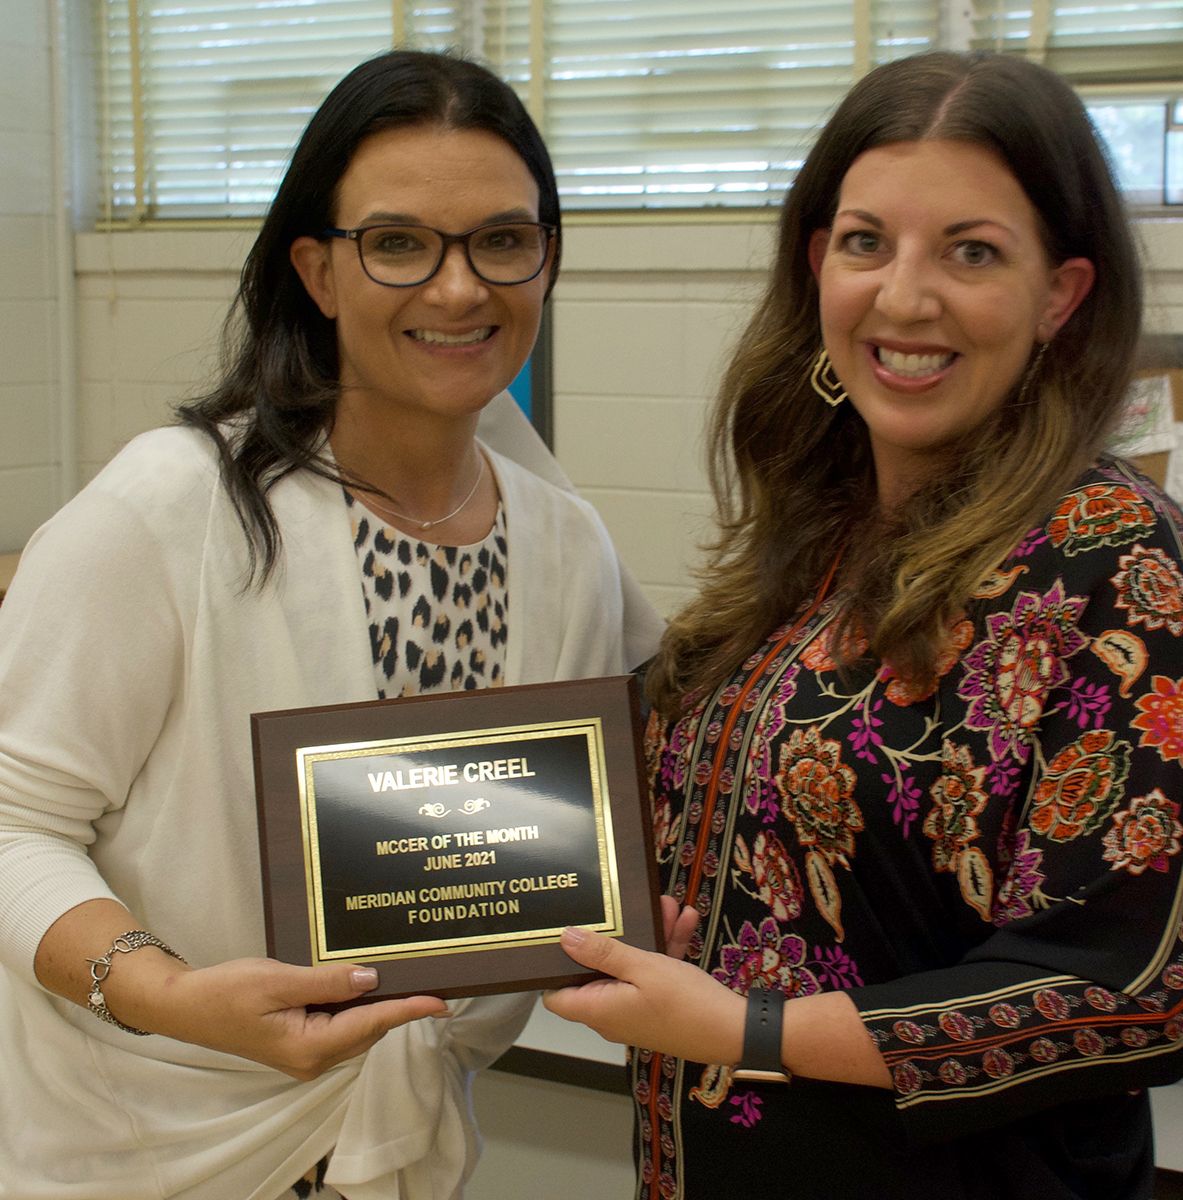 Leia Hill presents Valerie Creel with MCCer of the Month Award